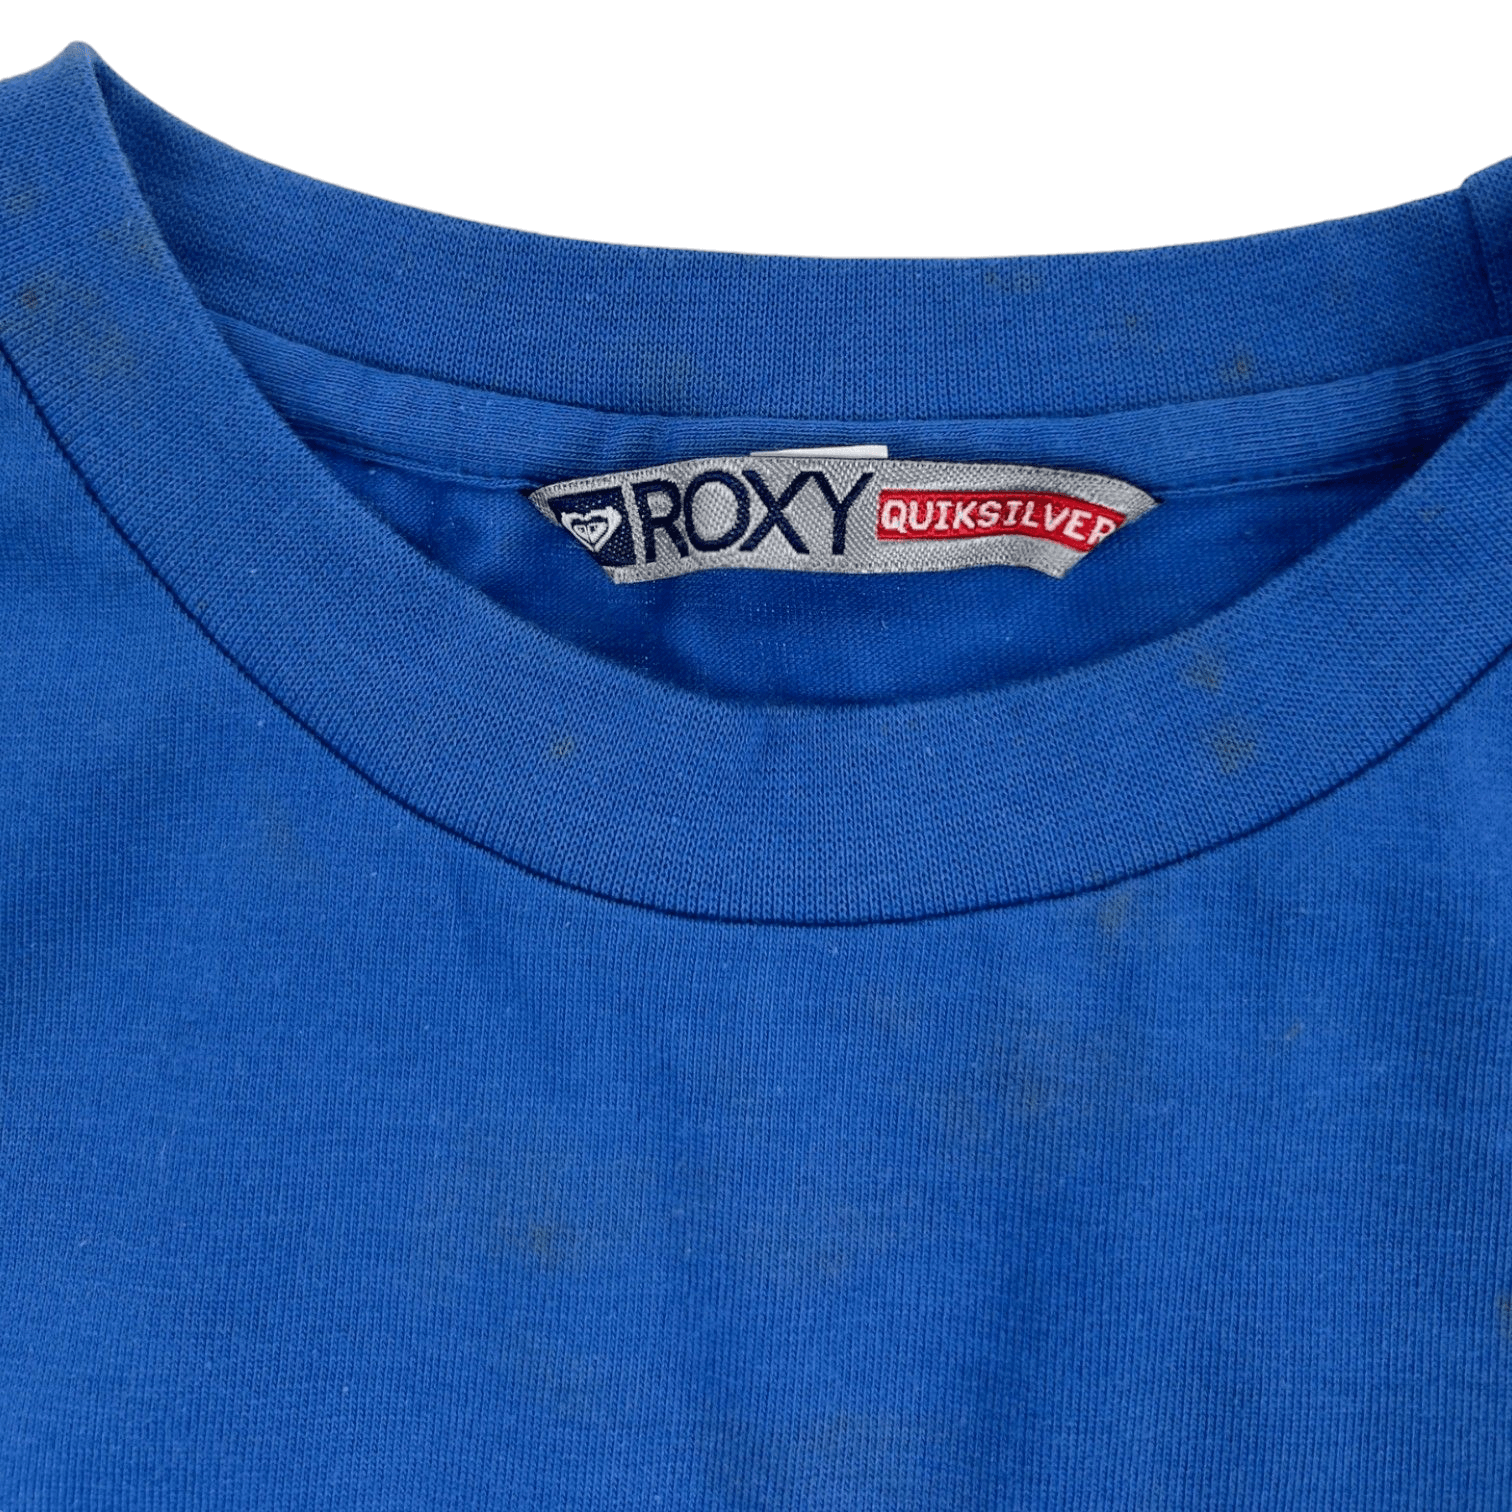 Vintage Quiksilver Roxy Logo Baby Doll T-Shirt Womans Size S - Known Source